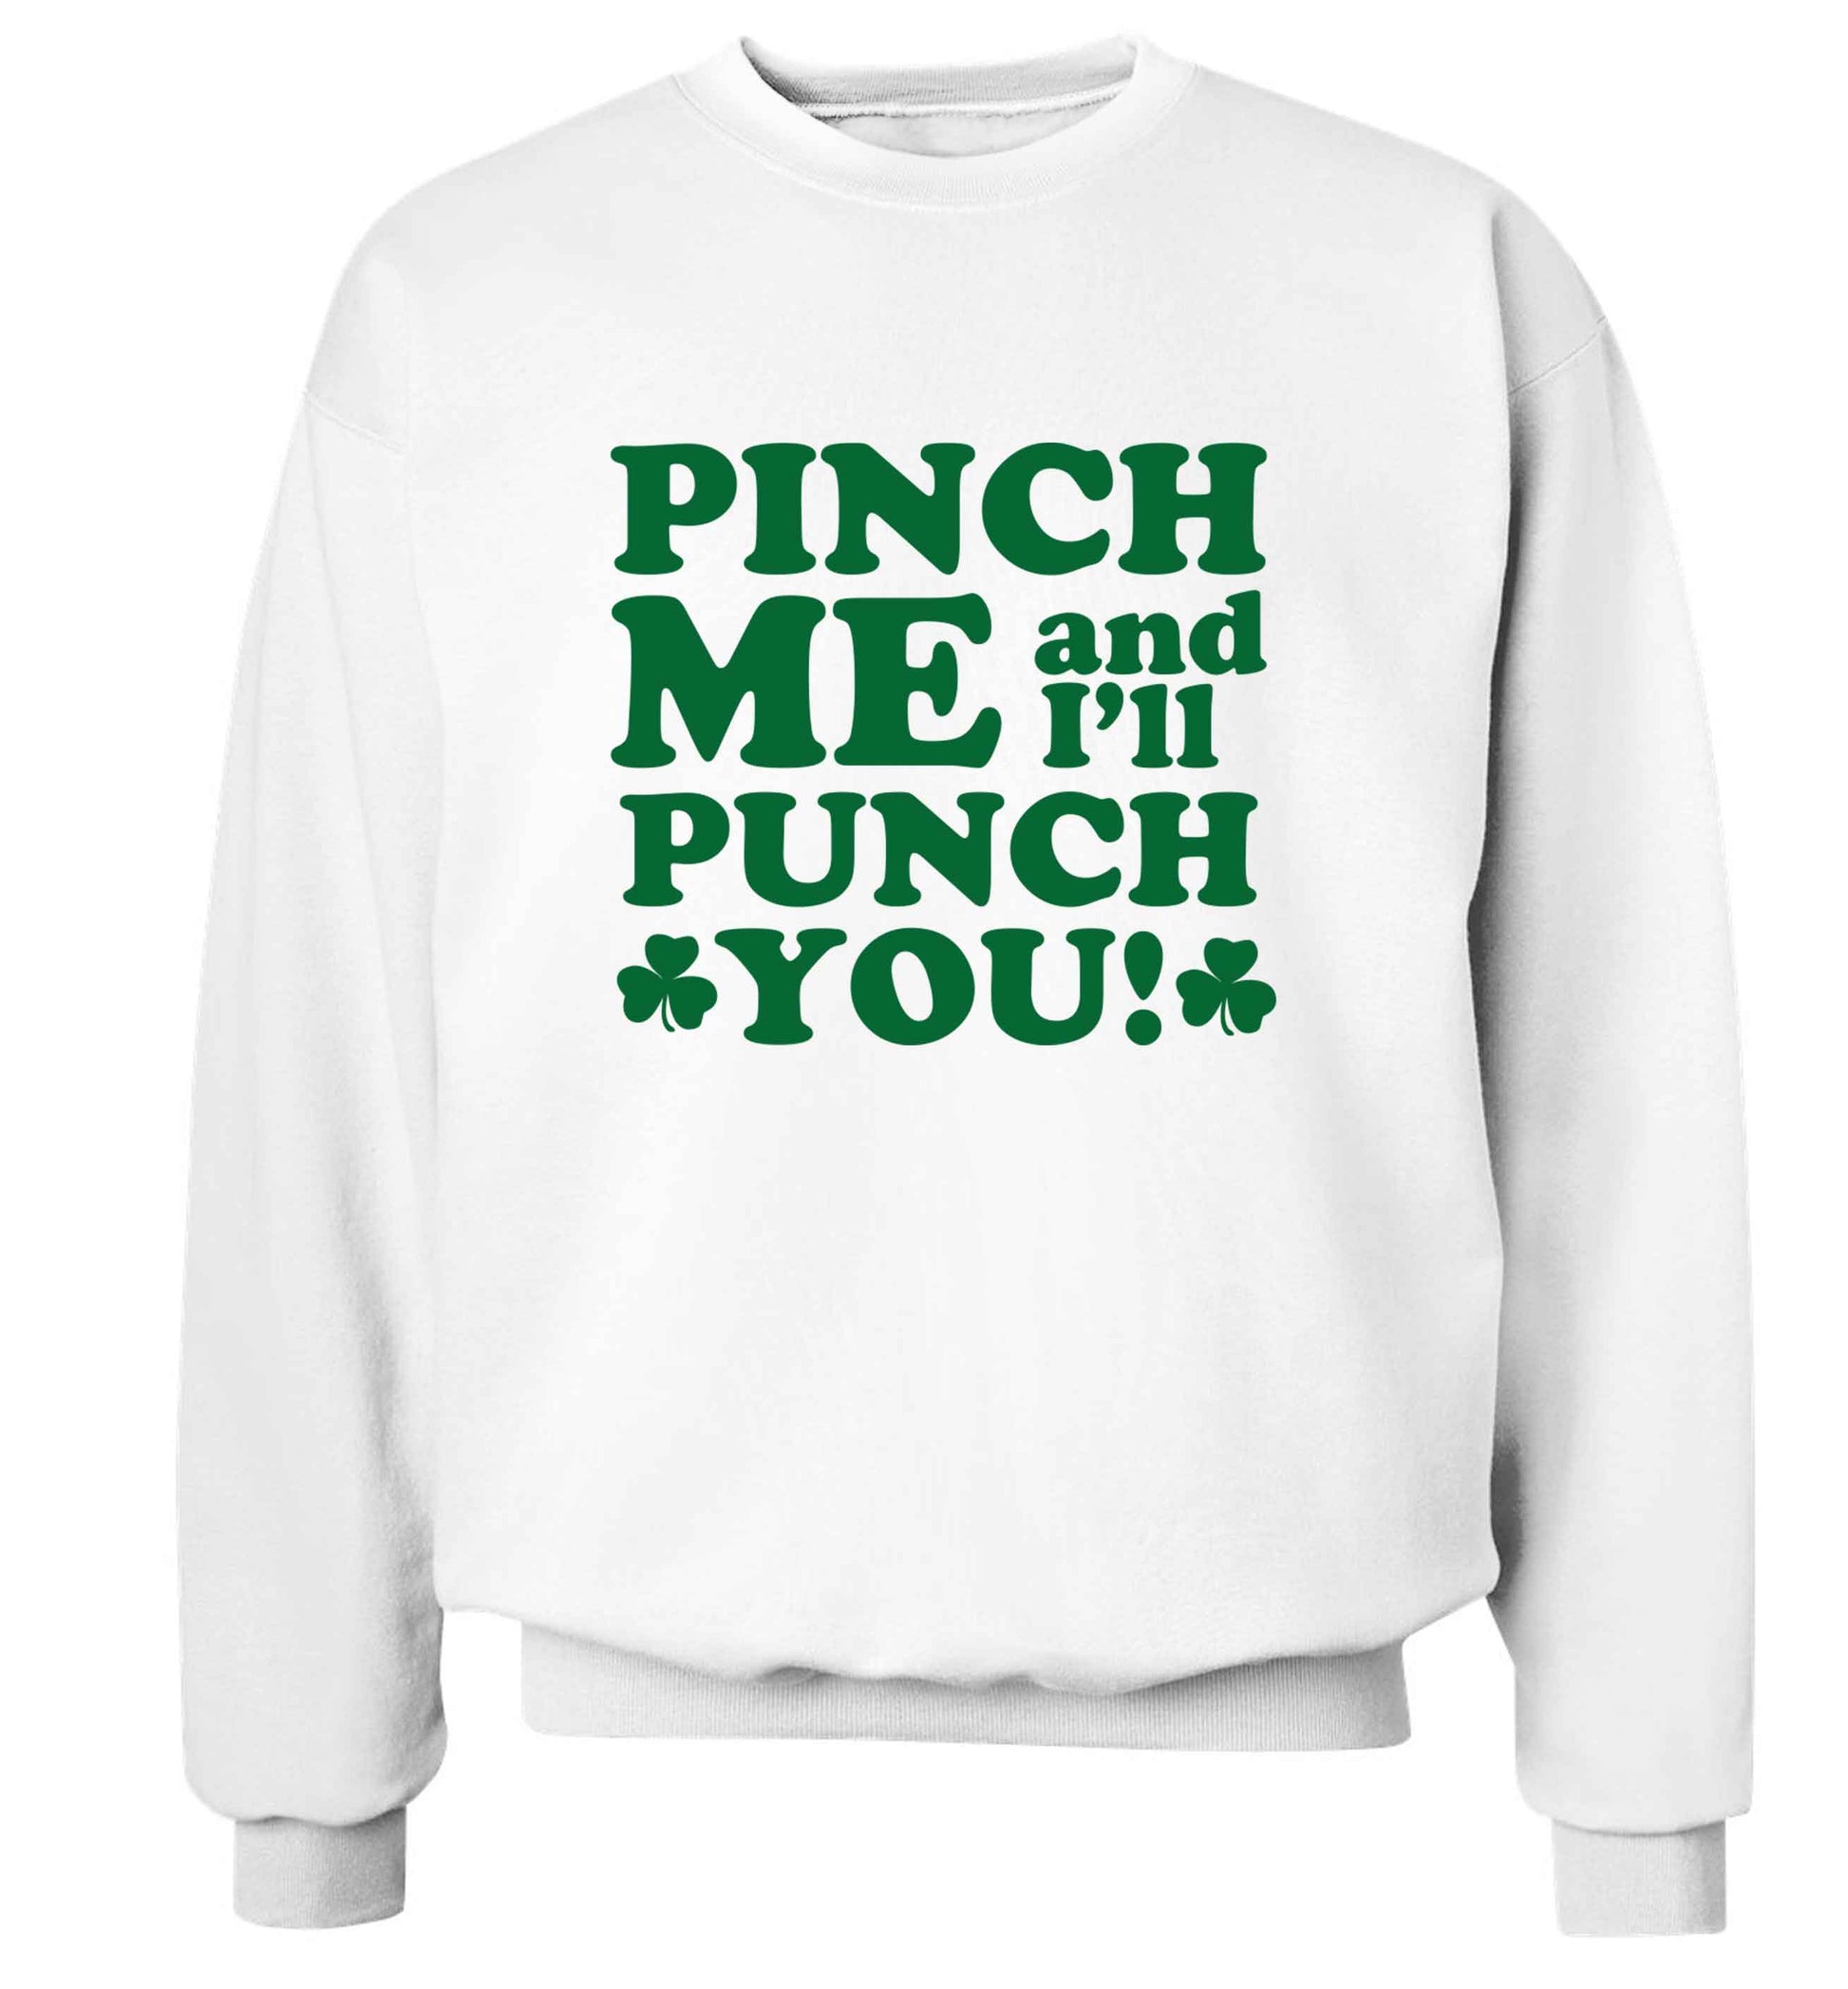 Pinch me and I'll punch you adult's unisex white sweater 2XL